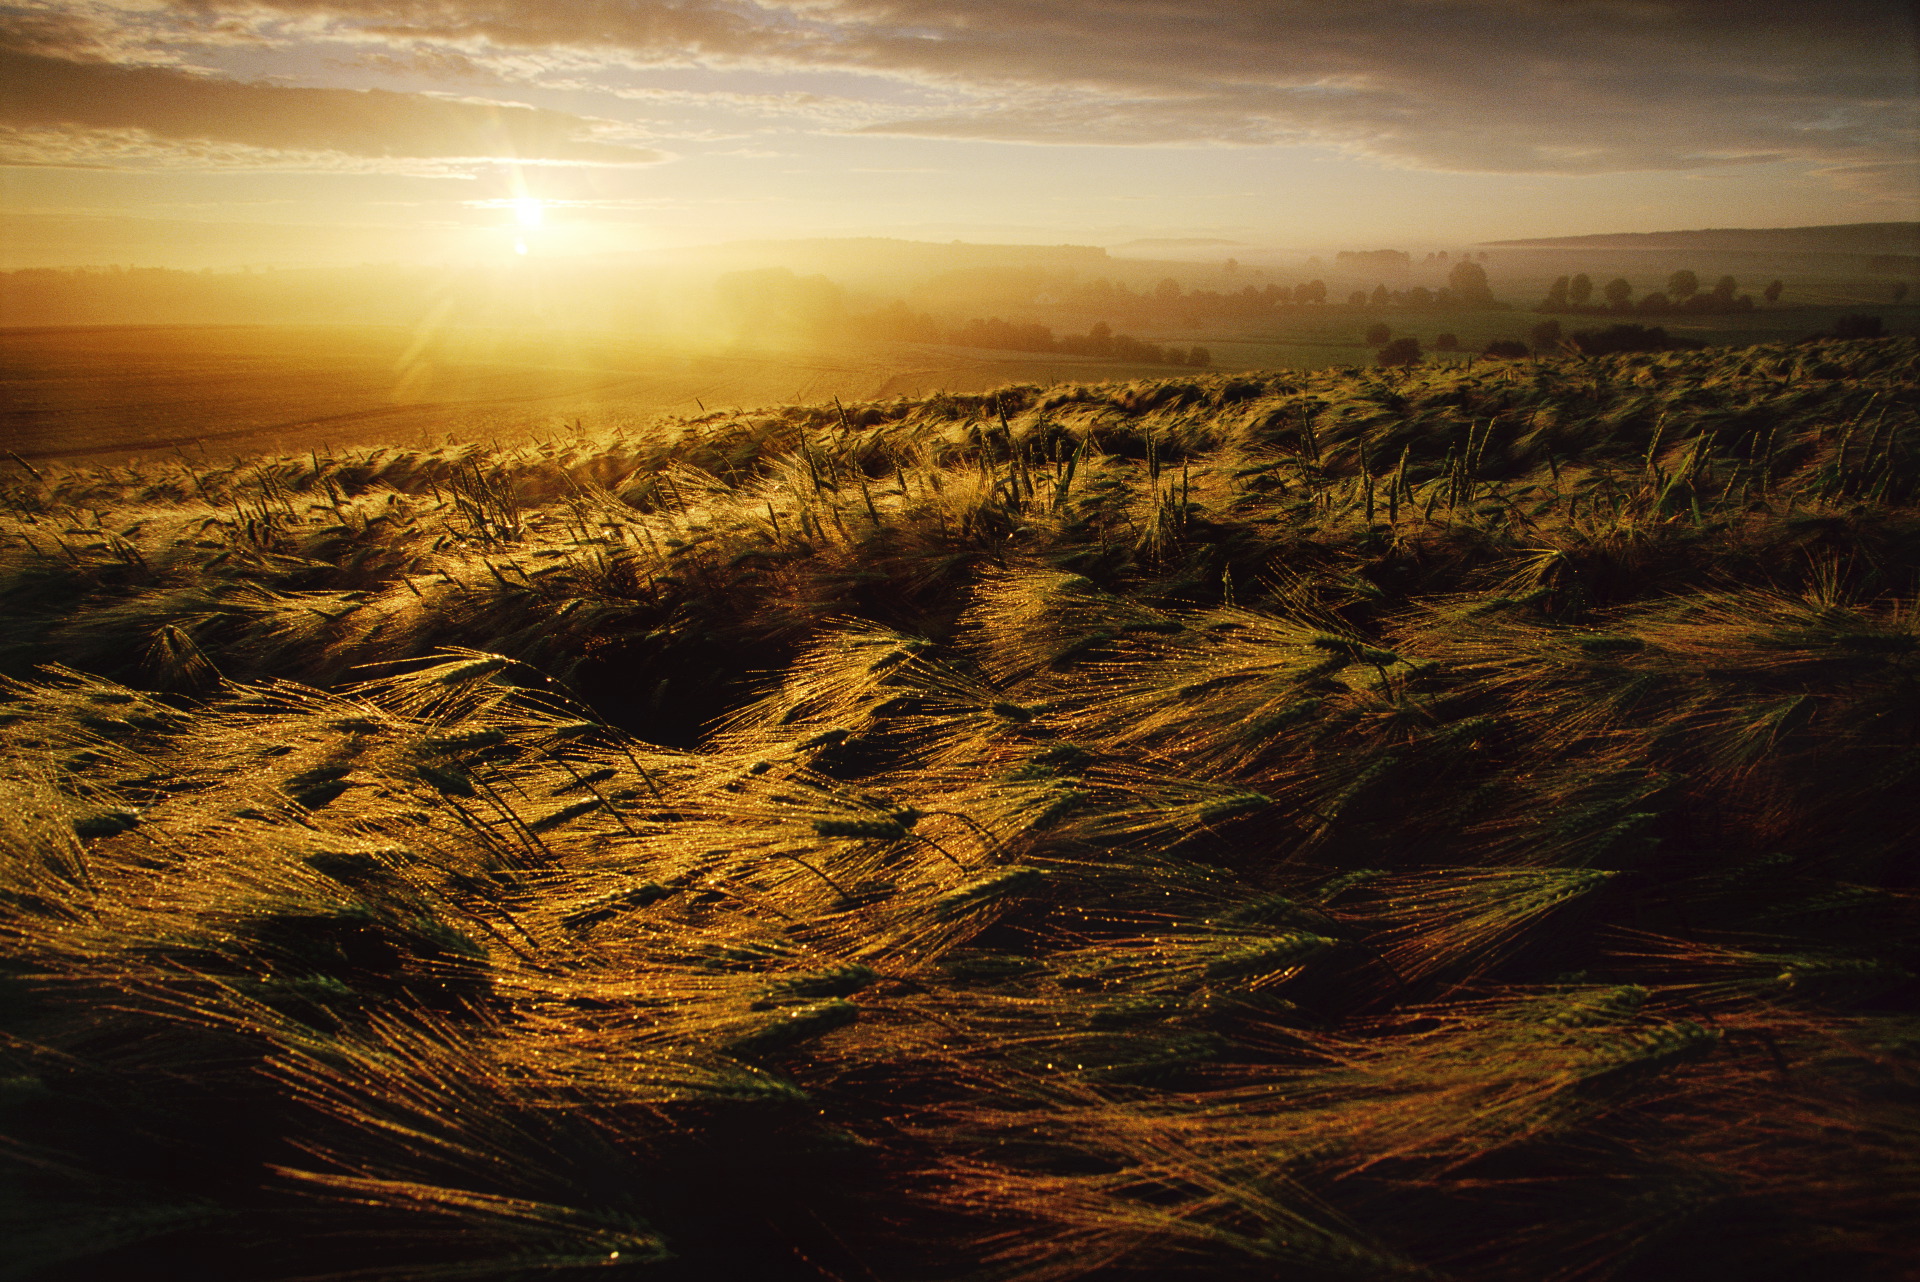  A barley field at sunrise, just outside Alsfeld, a small German town. Germany is the among the top producers of barley worldwide.  Alsfeld, Germany  